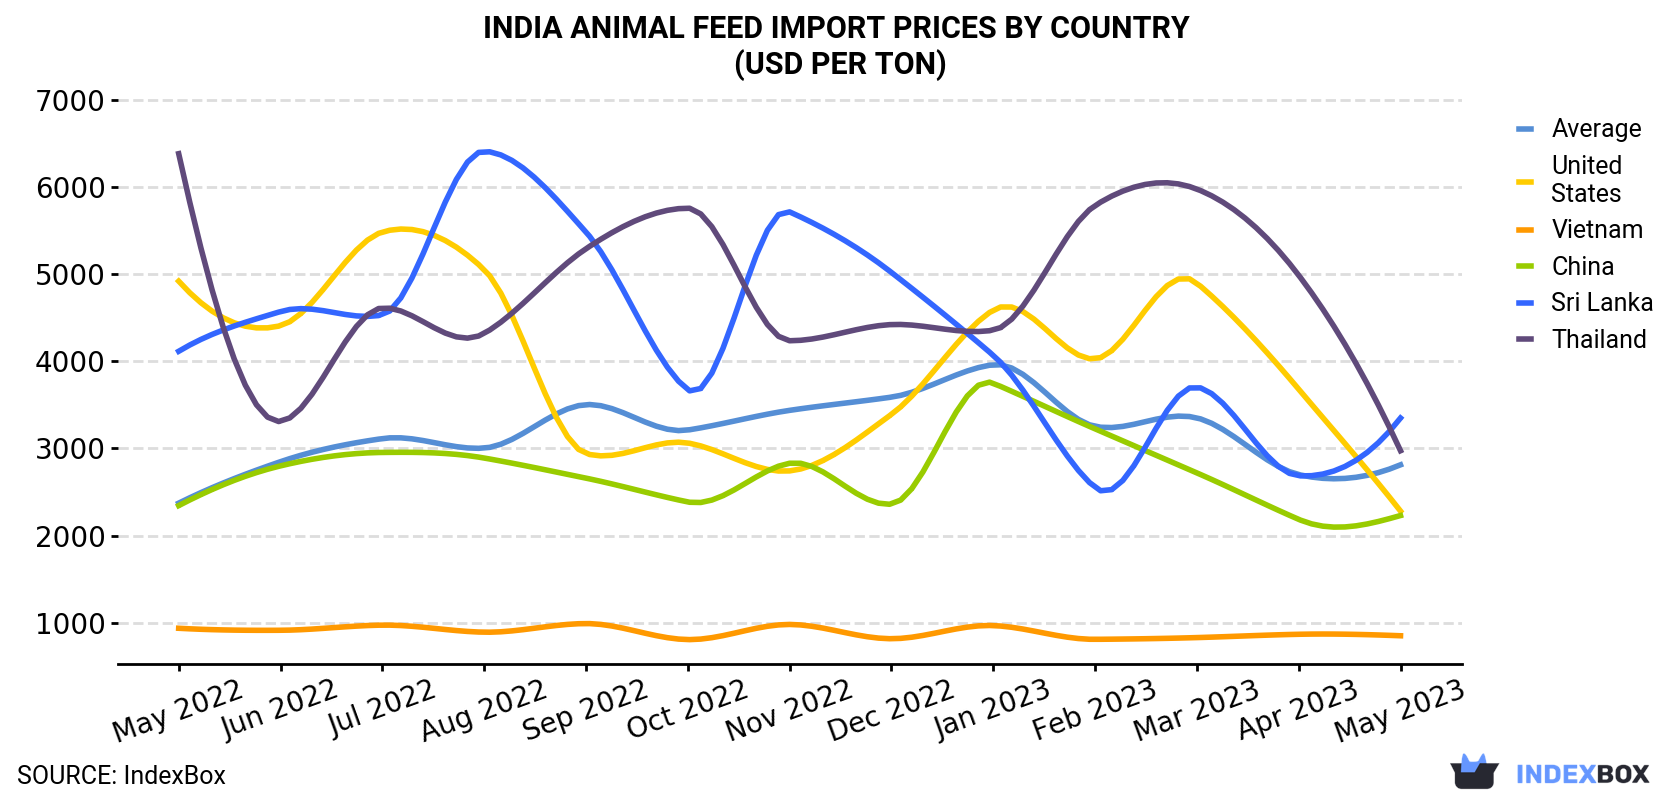 India Animal Feed Import Prices By Country (USD Per Ton)